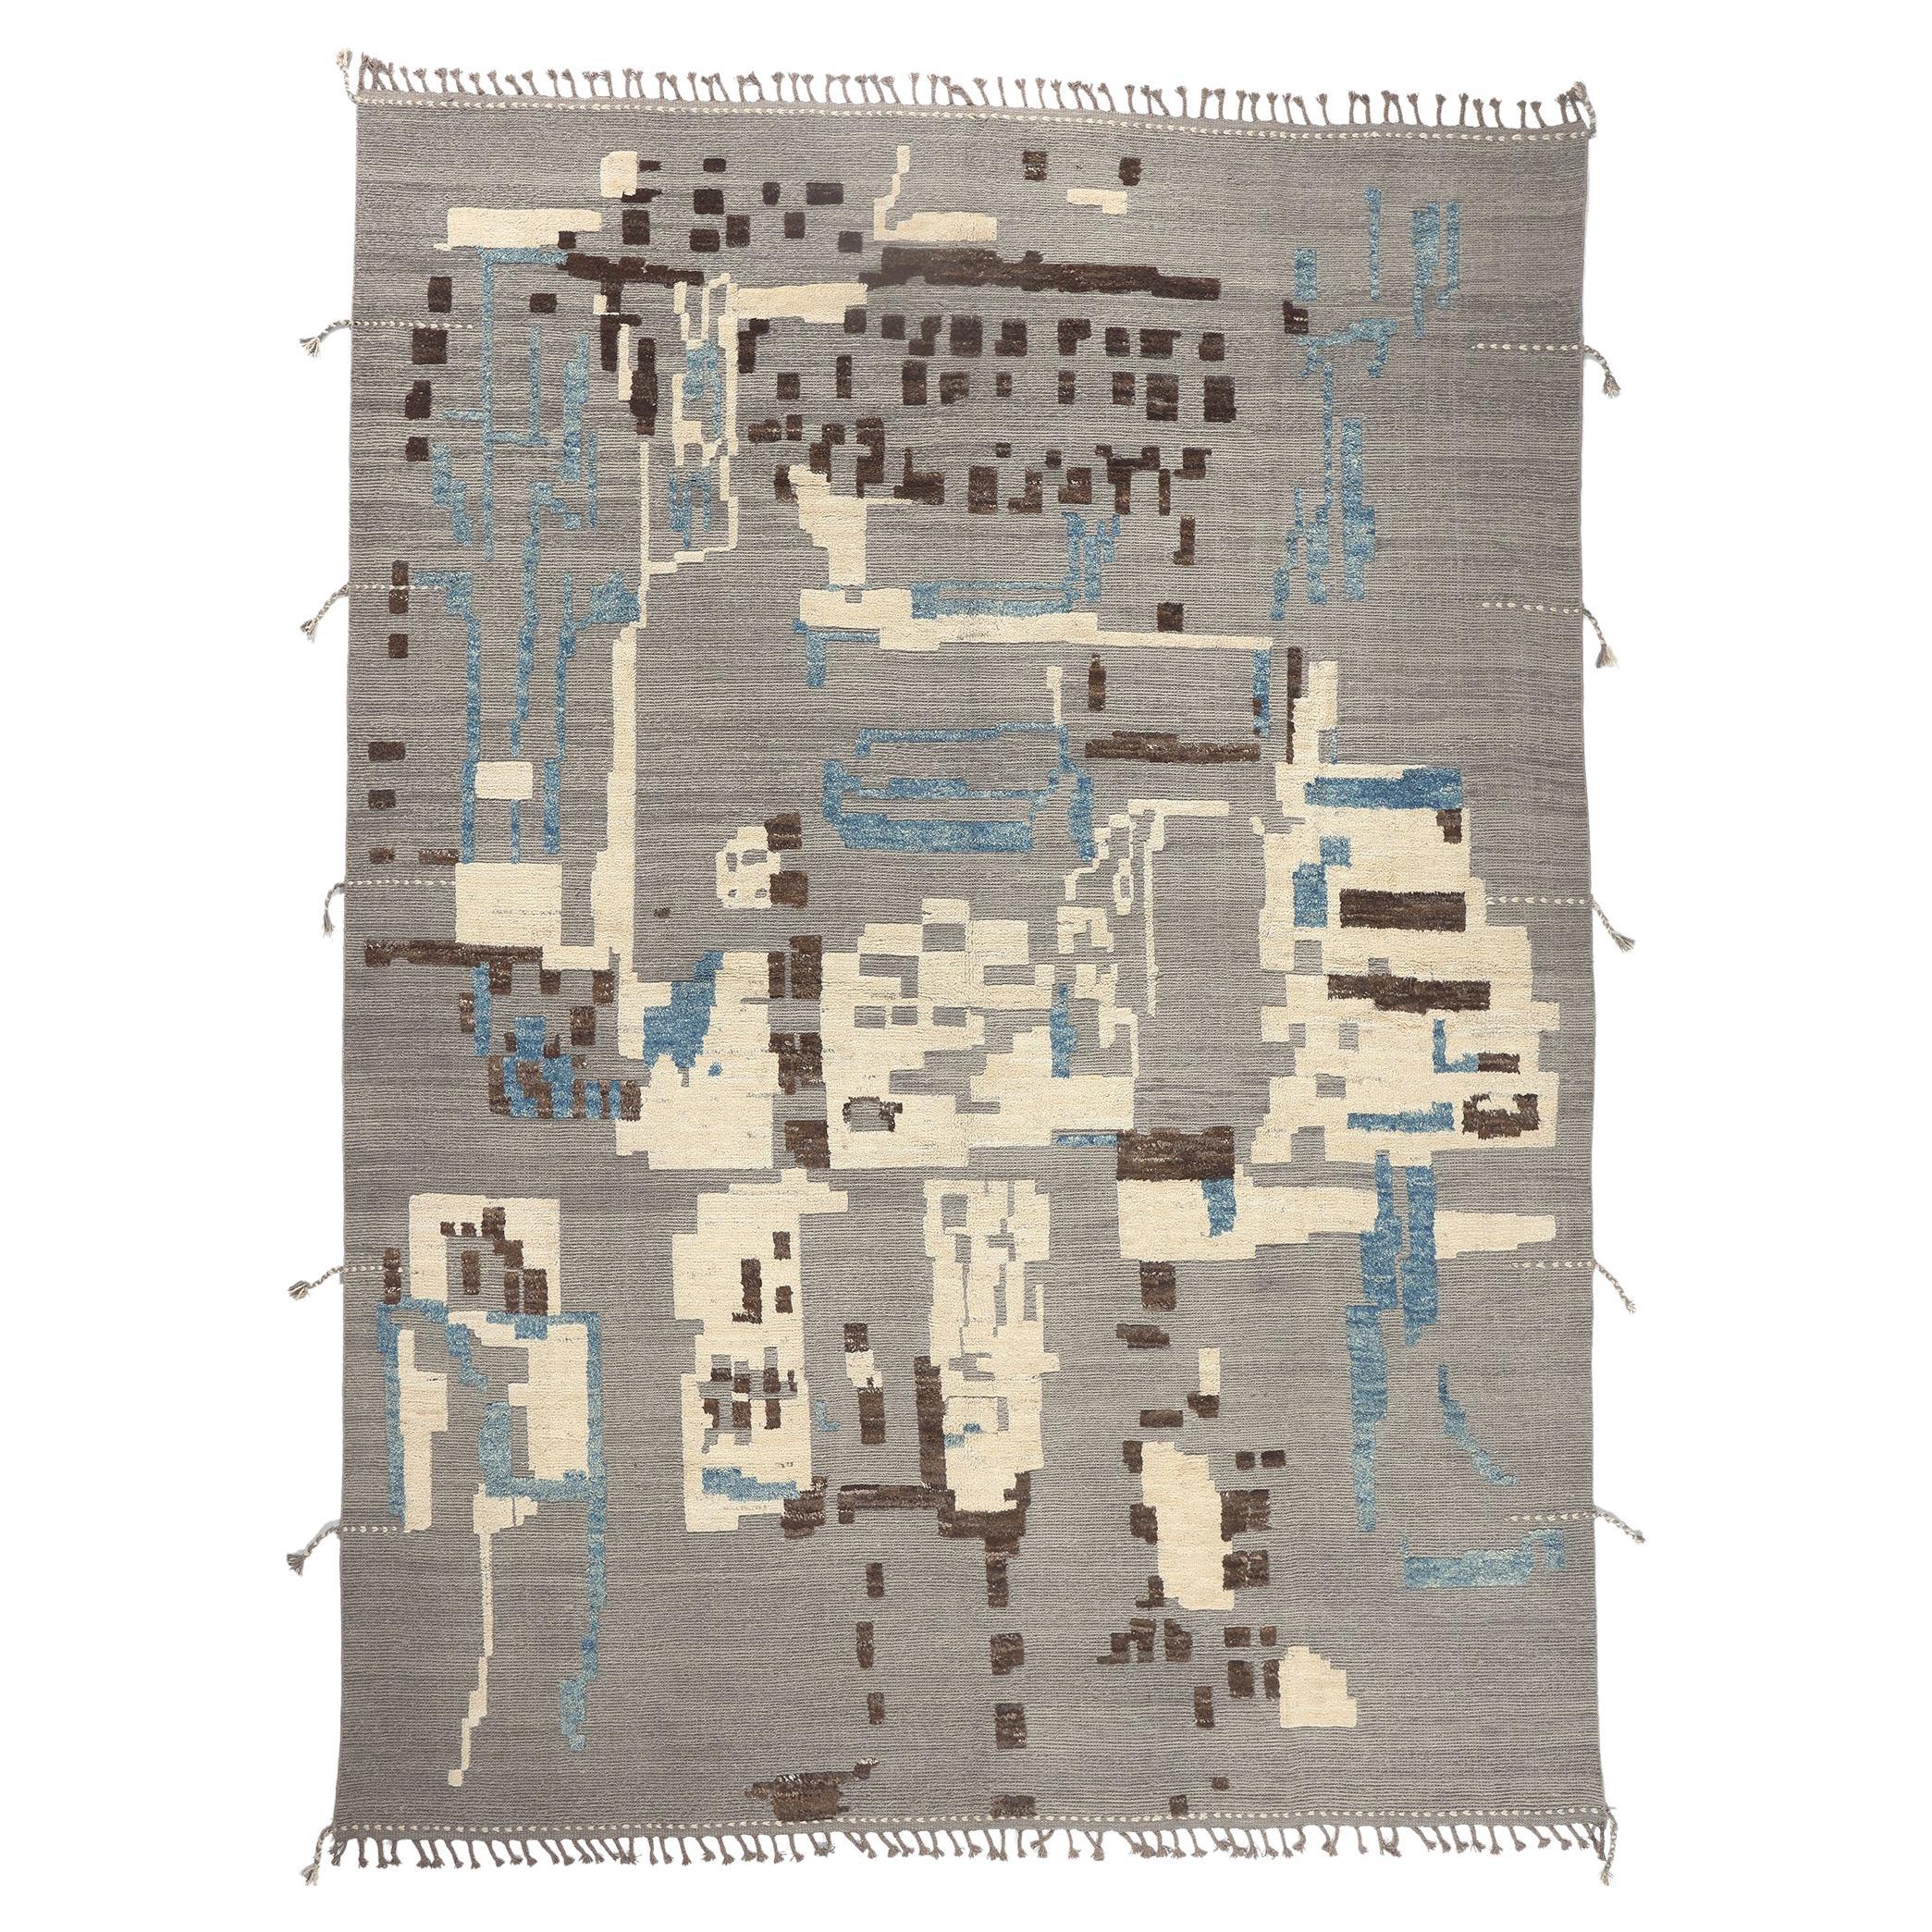 Earth-Tone Modern Moroccan High-Low Rug Inspired by Nature, Biophilic Design